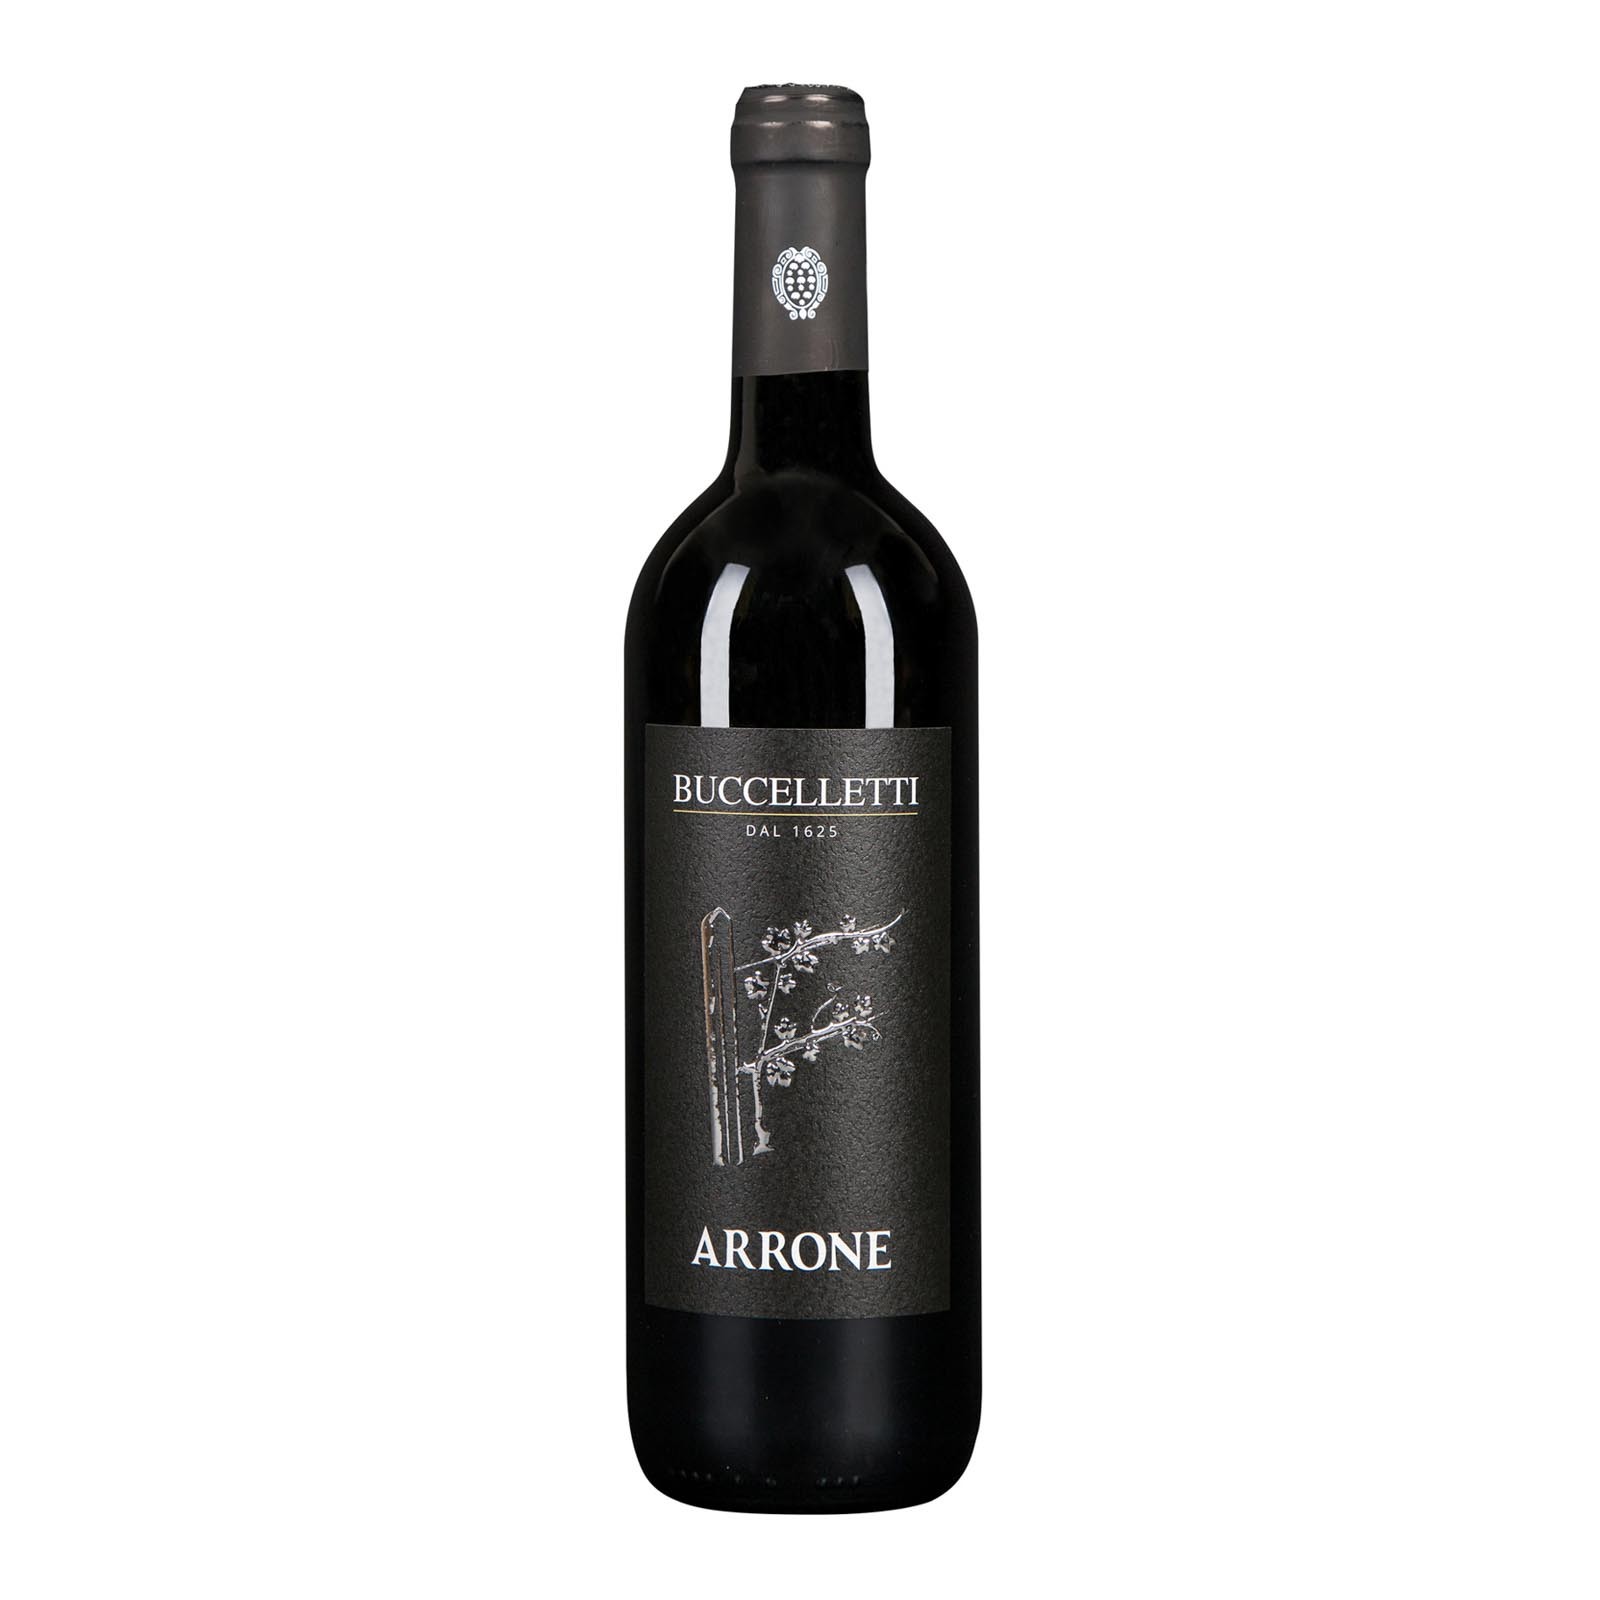 “Arrone” of Buccelletti is a vintage wine with a fruity flavor and a fresh, lightly tannic finish, ideal throughout the meal from start to finish. It is made from a blend of Sangiovese and Canaiolo grapes.